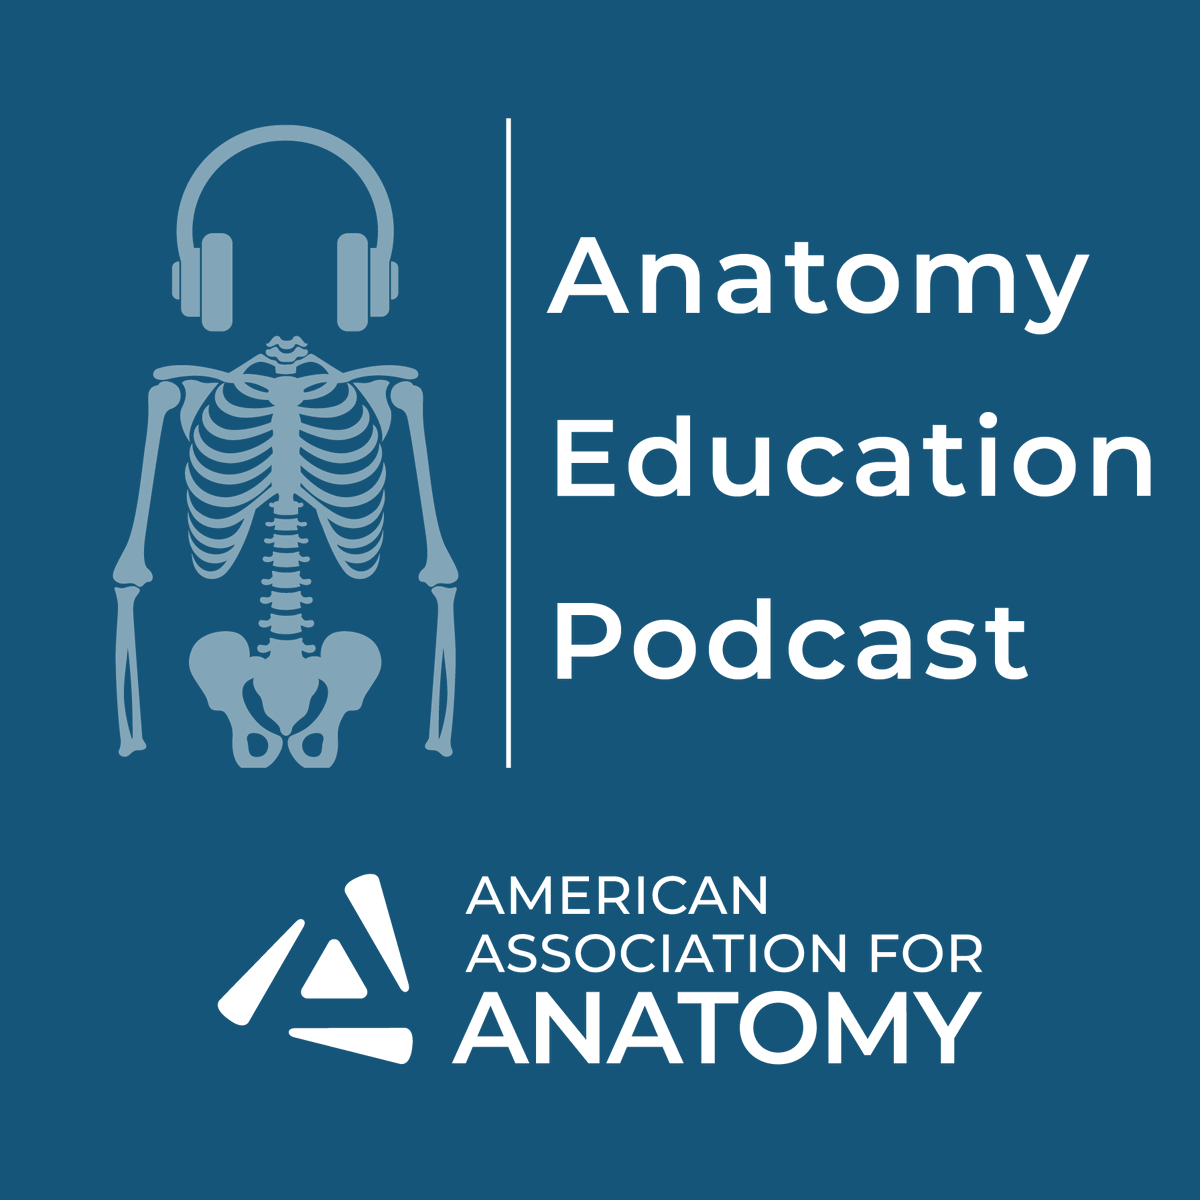 Check out and subscribe to the Anatomy Education Podcast brought to you by AAA! A new series and episodes are in the works. Stay tuned! You can listen to the released episodes on our website or various streaming platforms. ow.ly/Nzhp50OT3h5 #Anatomy24 #AAA #podcast